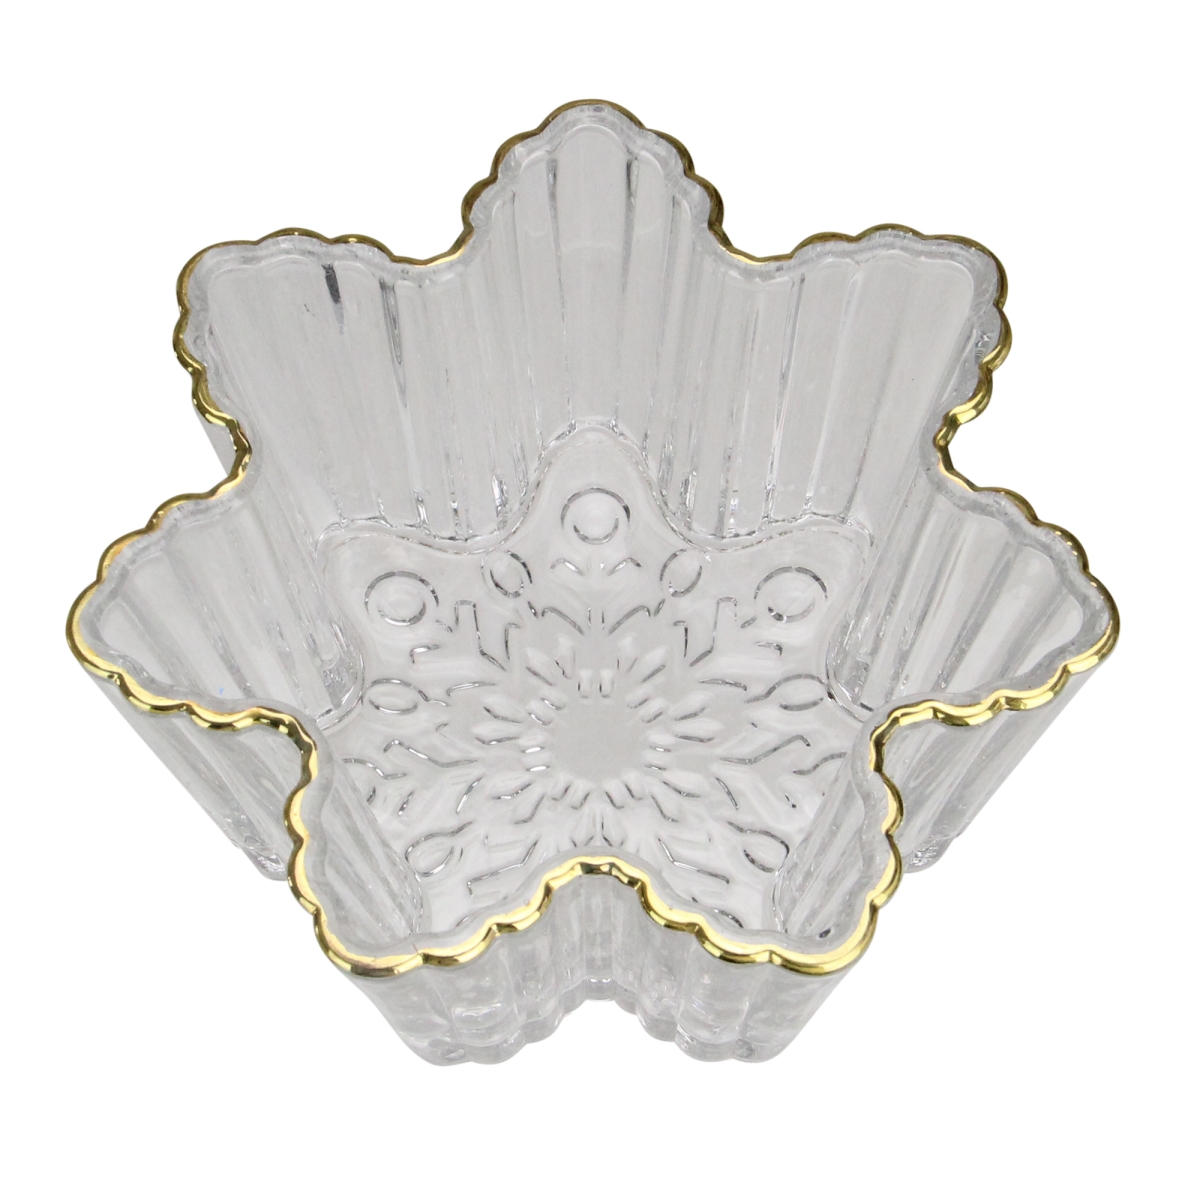 Picture of Avon 33537603 5.75 in. Clear & Gold Winter Snowflake Christmas Candy Dish Serving Bowl